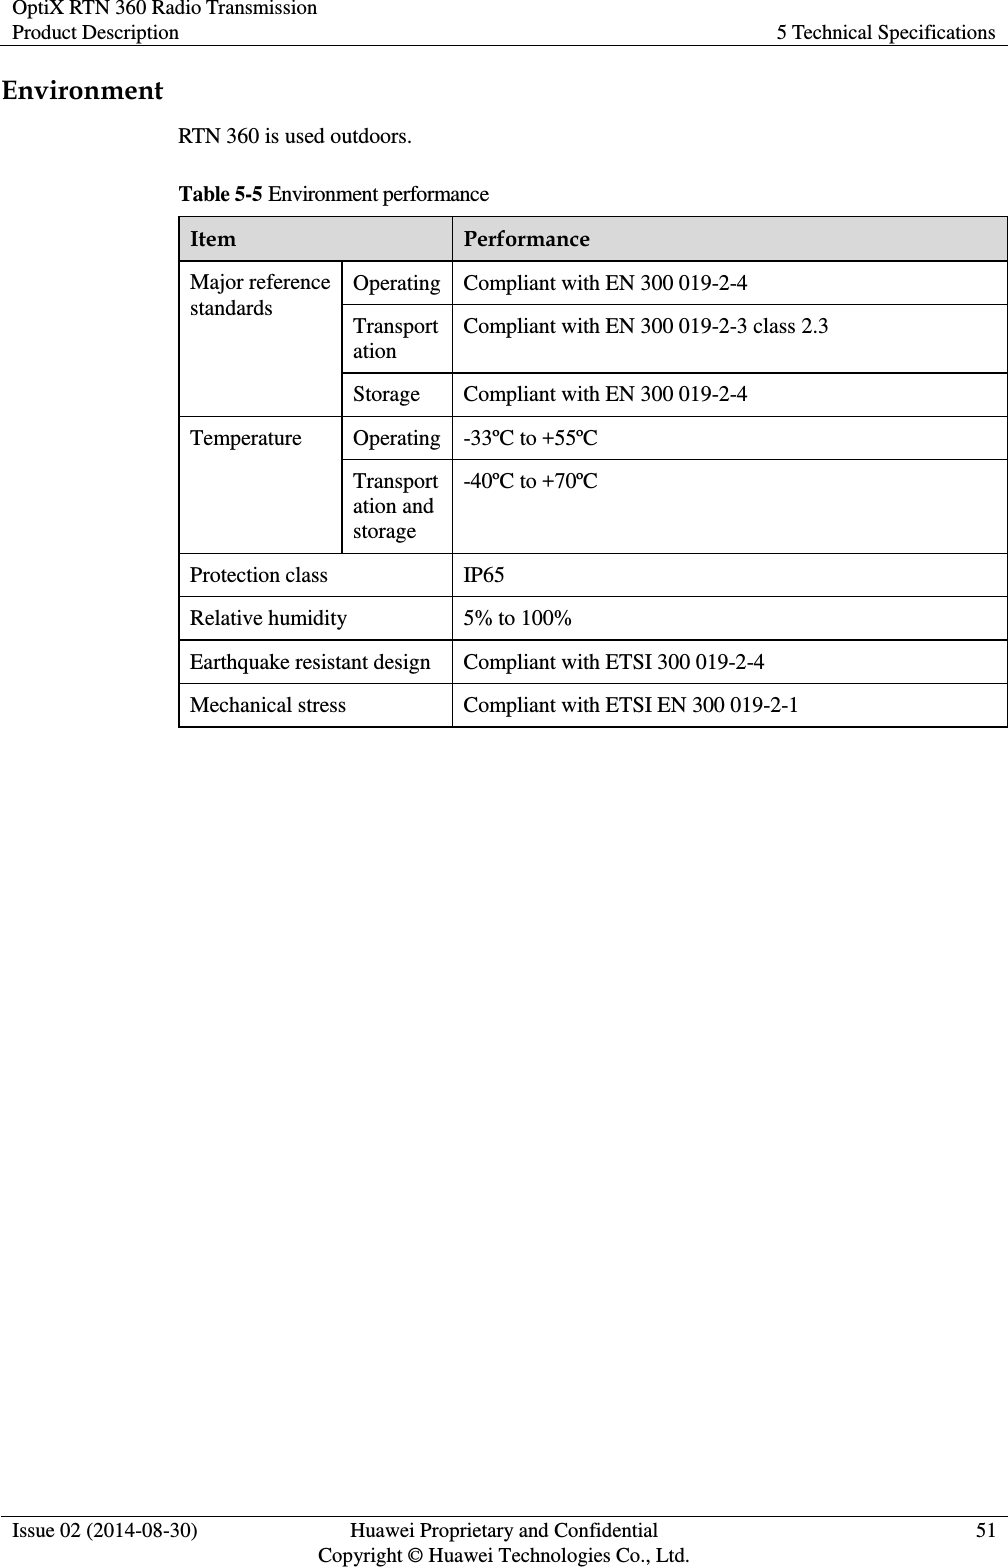 OptiX RTN 360 Radio Transmission Product Description 5 Technical Specifications  Issue 02 (2014-08-30) Huawei Proprietary and Confidential                                     Copyright © Huawei Technologies Co., Ltd. 51  Environment RTN 360 is used outdoors. Table 5-5 Environment performance Item Performance Major reference standards Operating Compliant with EN 300 019-2-4 Transportation Compliant with EN 300 019-2-3 class 2.3 Storage Compliant with EN 300 019-2-4 Temperature Operating -33ºC to +55ºC Transportation and storage -40ºC to +70ºC Protection class IP65 Relative humidity 5% to 100% Earthquake resistant design Compliant with ETSI 300 019-2-4 Mechanical stress Compliant with ETSI EN 300 019-2-1 